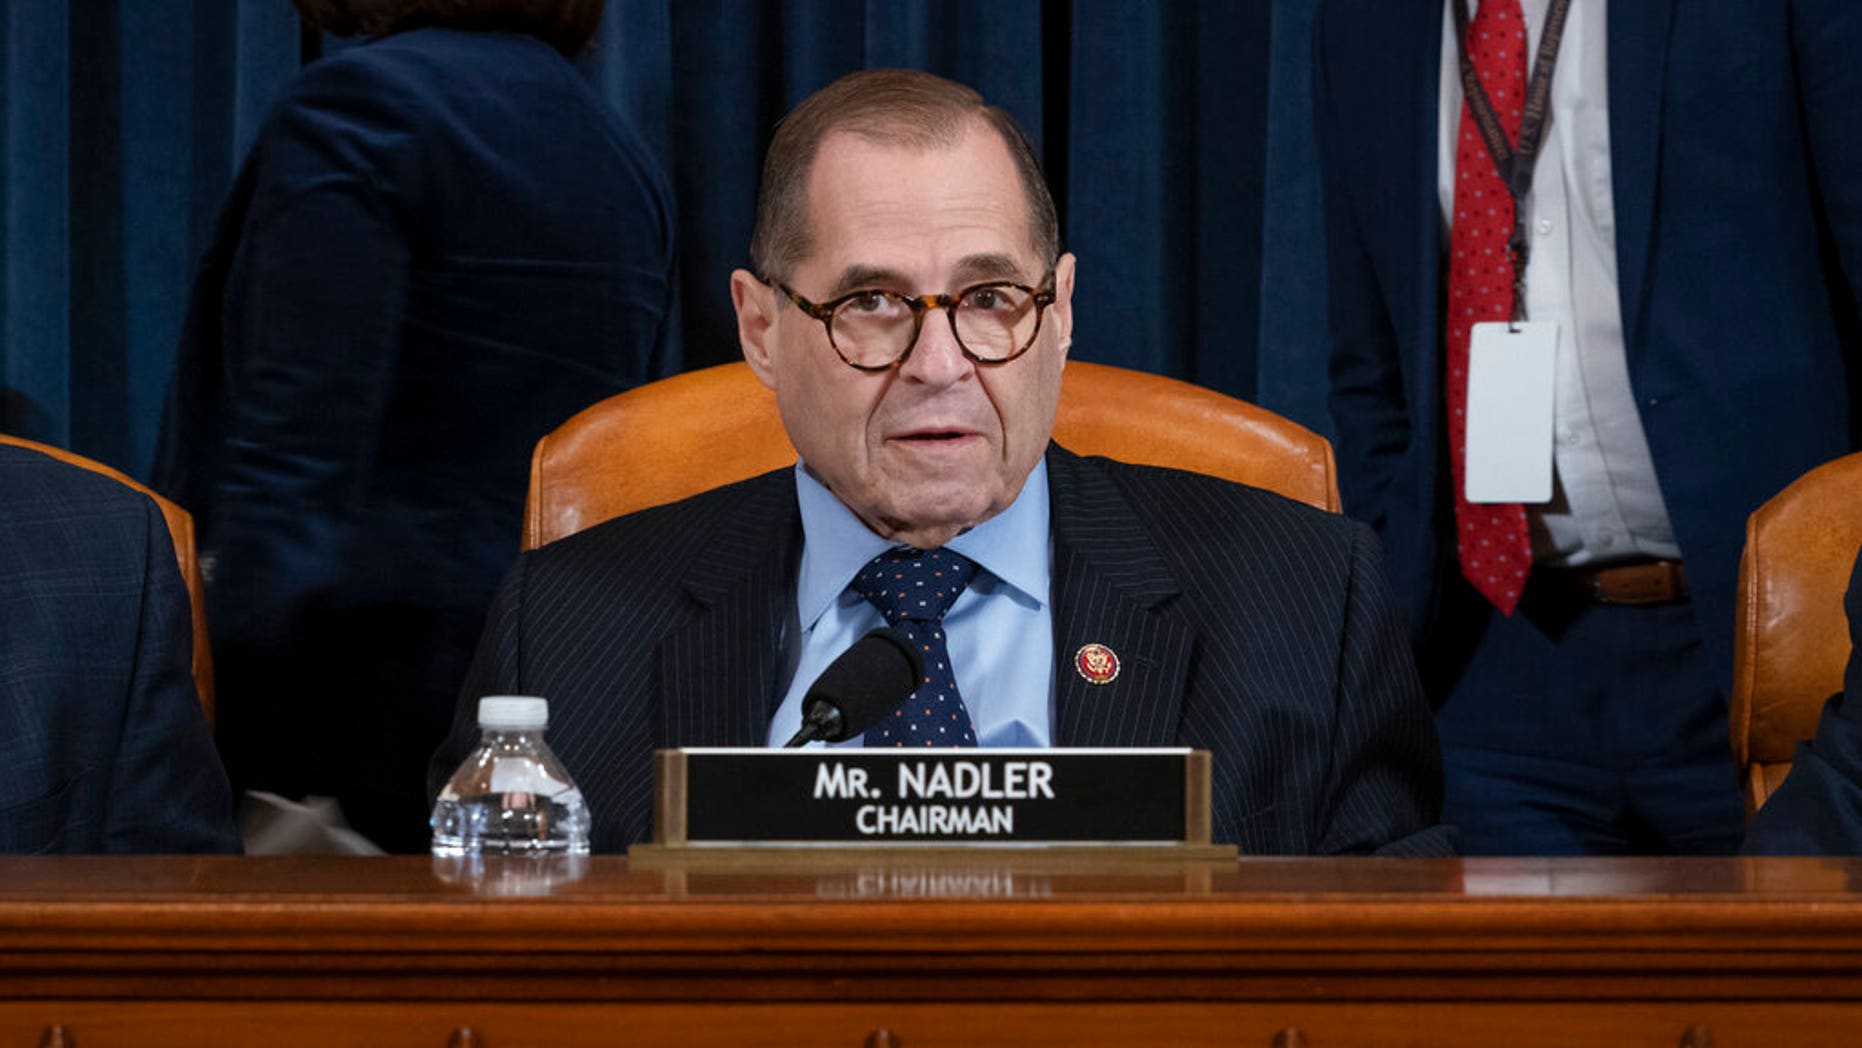 House Judiciary Committee Chairman Jerrold Nadler, D-N.Y., convenes a markup of the articles of impeachment against President Donald Trump, on Capitol Hill in Washington, Wednesday, Dec. 11, 2019. (AP Photo/J. Scott Applewhite)